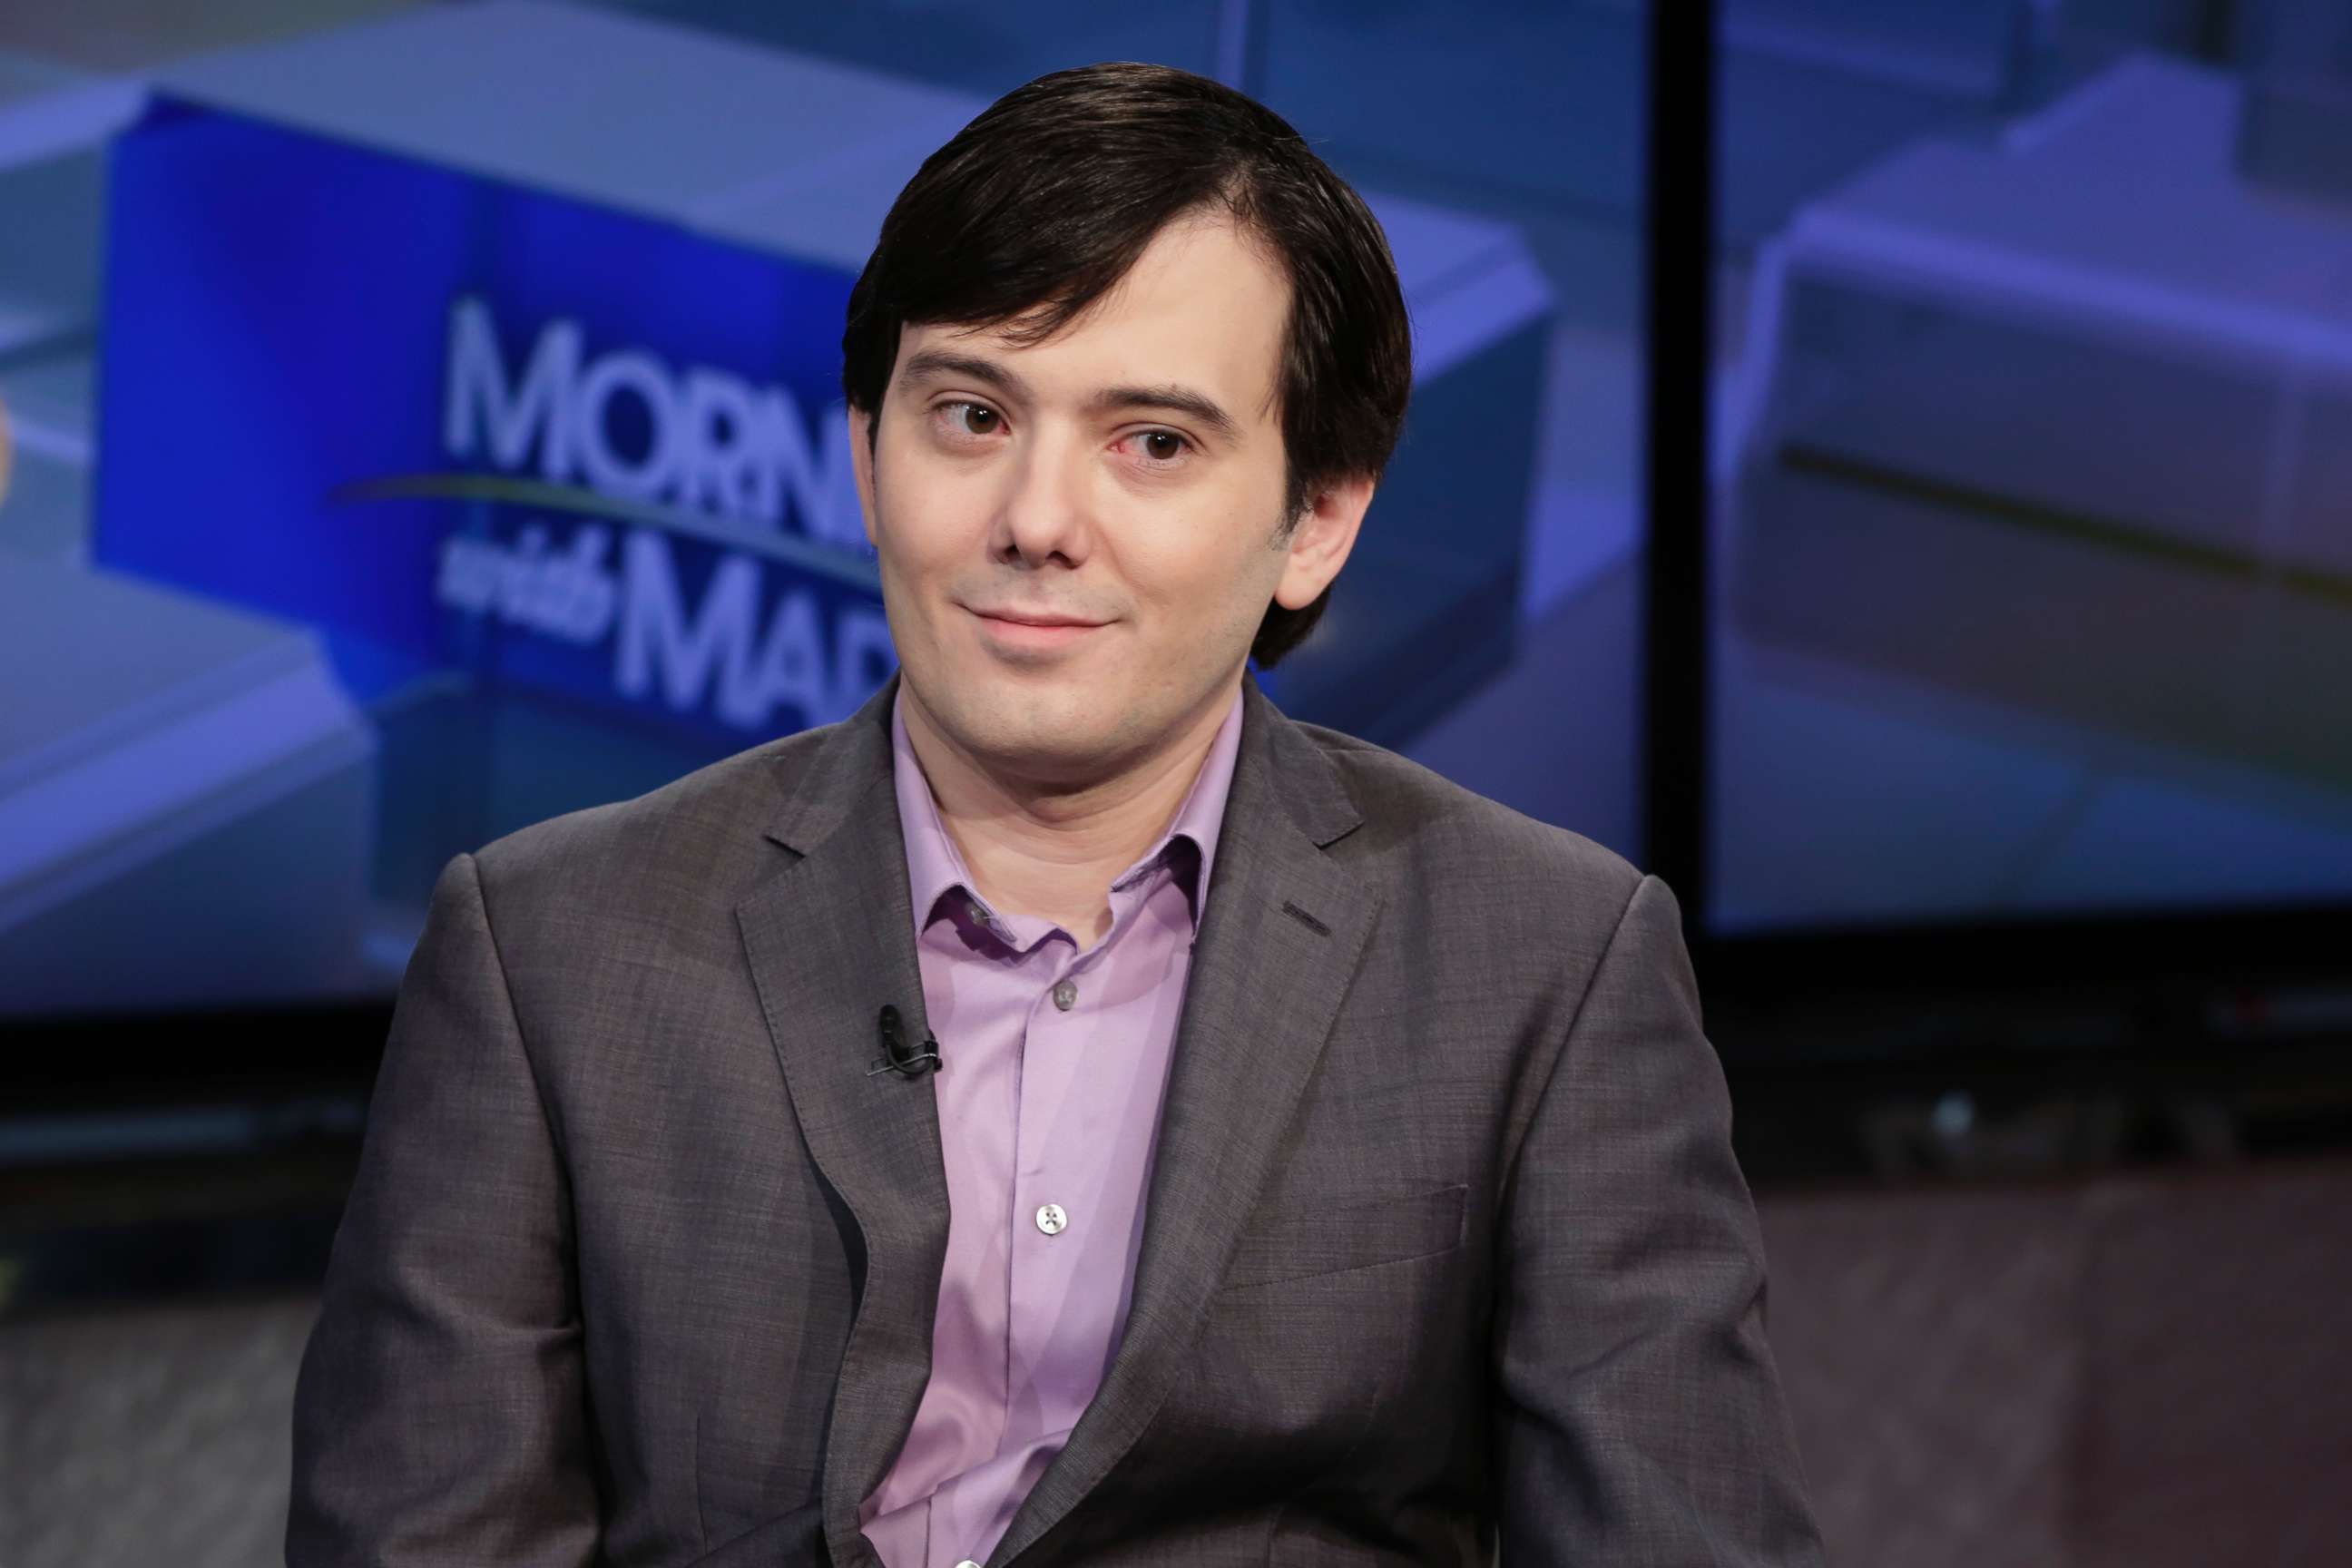 PHOTO: In this file photo, Martin Shkreli is interviewed by Maria Bartiromo during her "Mornings with Maria Bartiromo" program on the Fox Business Network, in New York, Aug. 15, 2017.